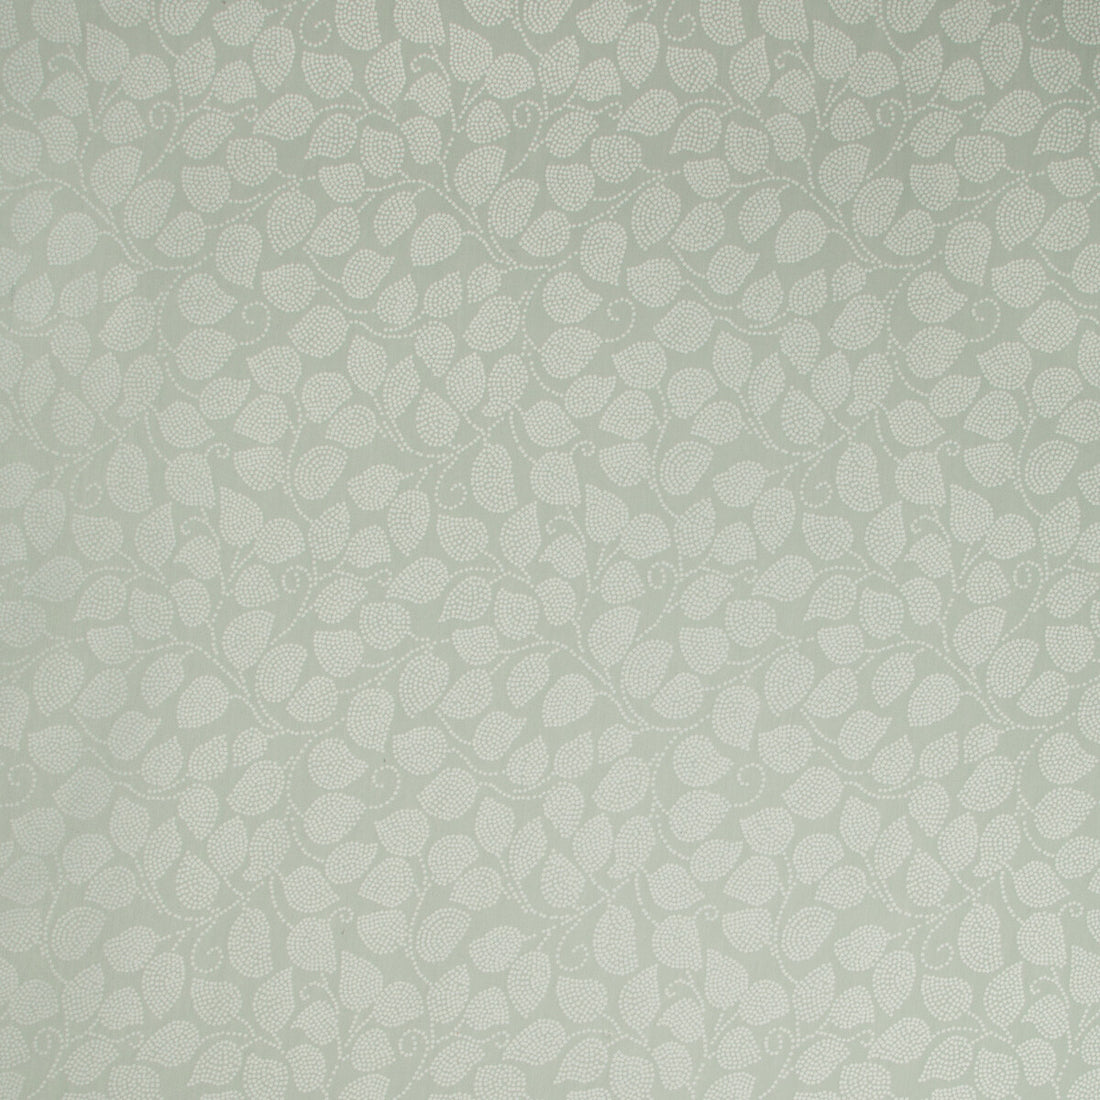 Dotted Leaves fabric in cloud color - pattern 4627.23.0 - by Kravet Contract in the Privacy Curtains collection